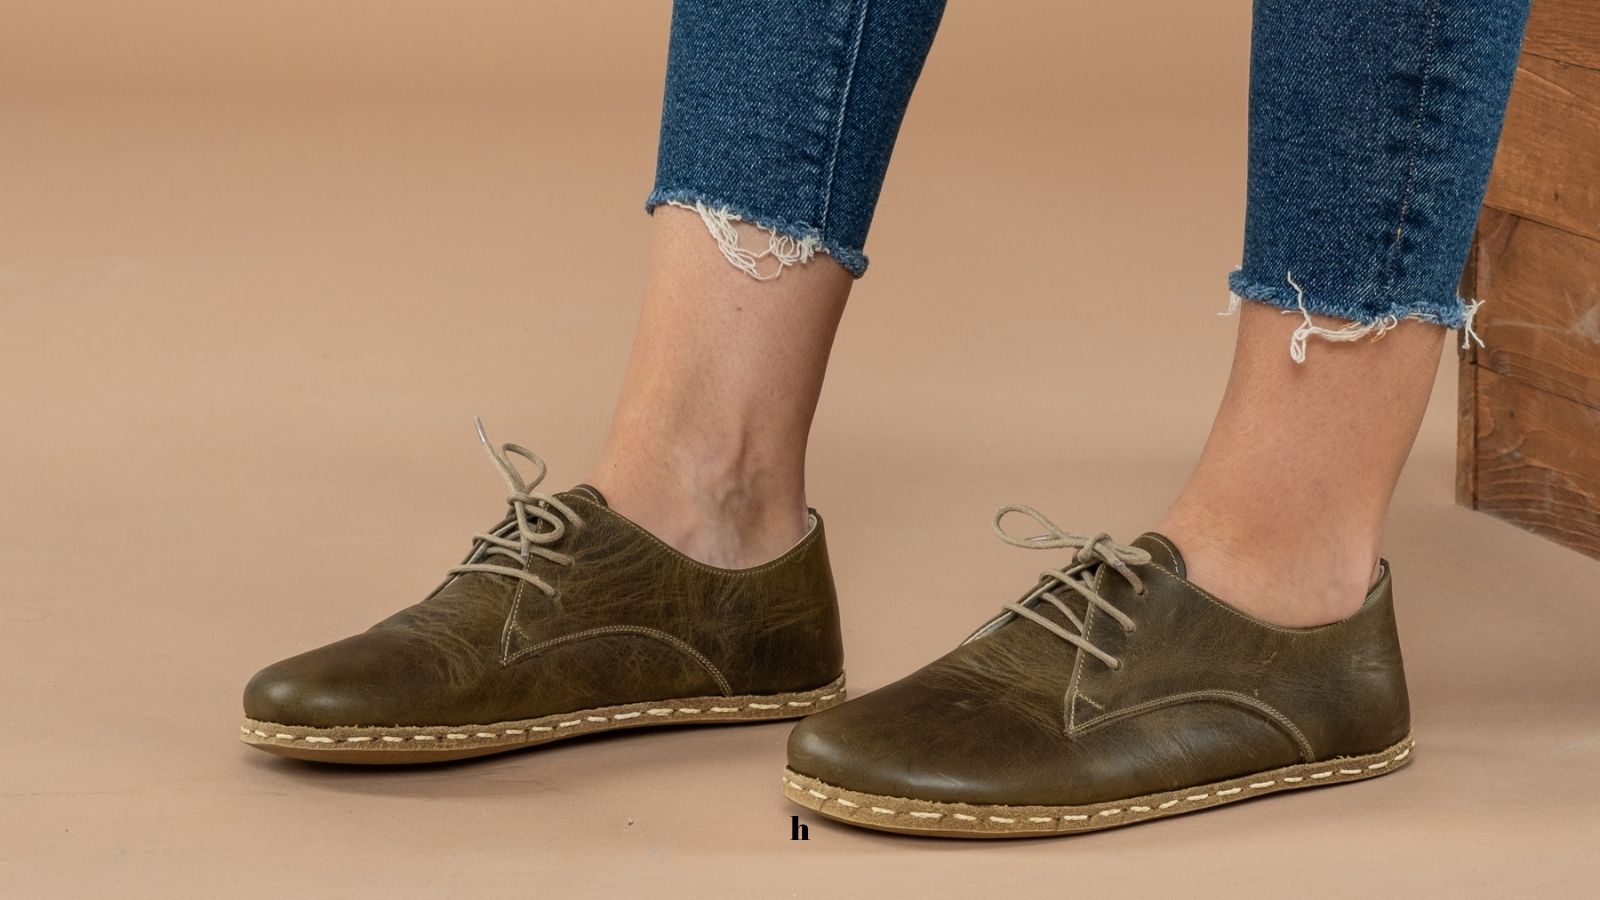 Can You Wear Oxford Shoes With Jeans?